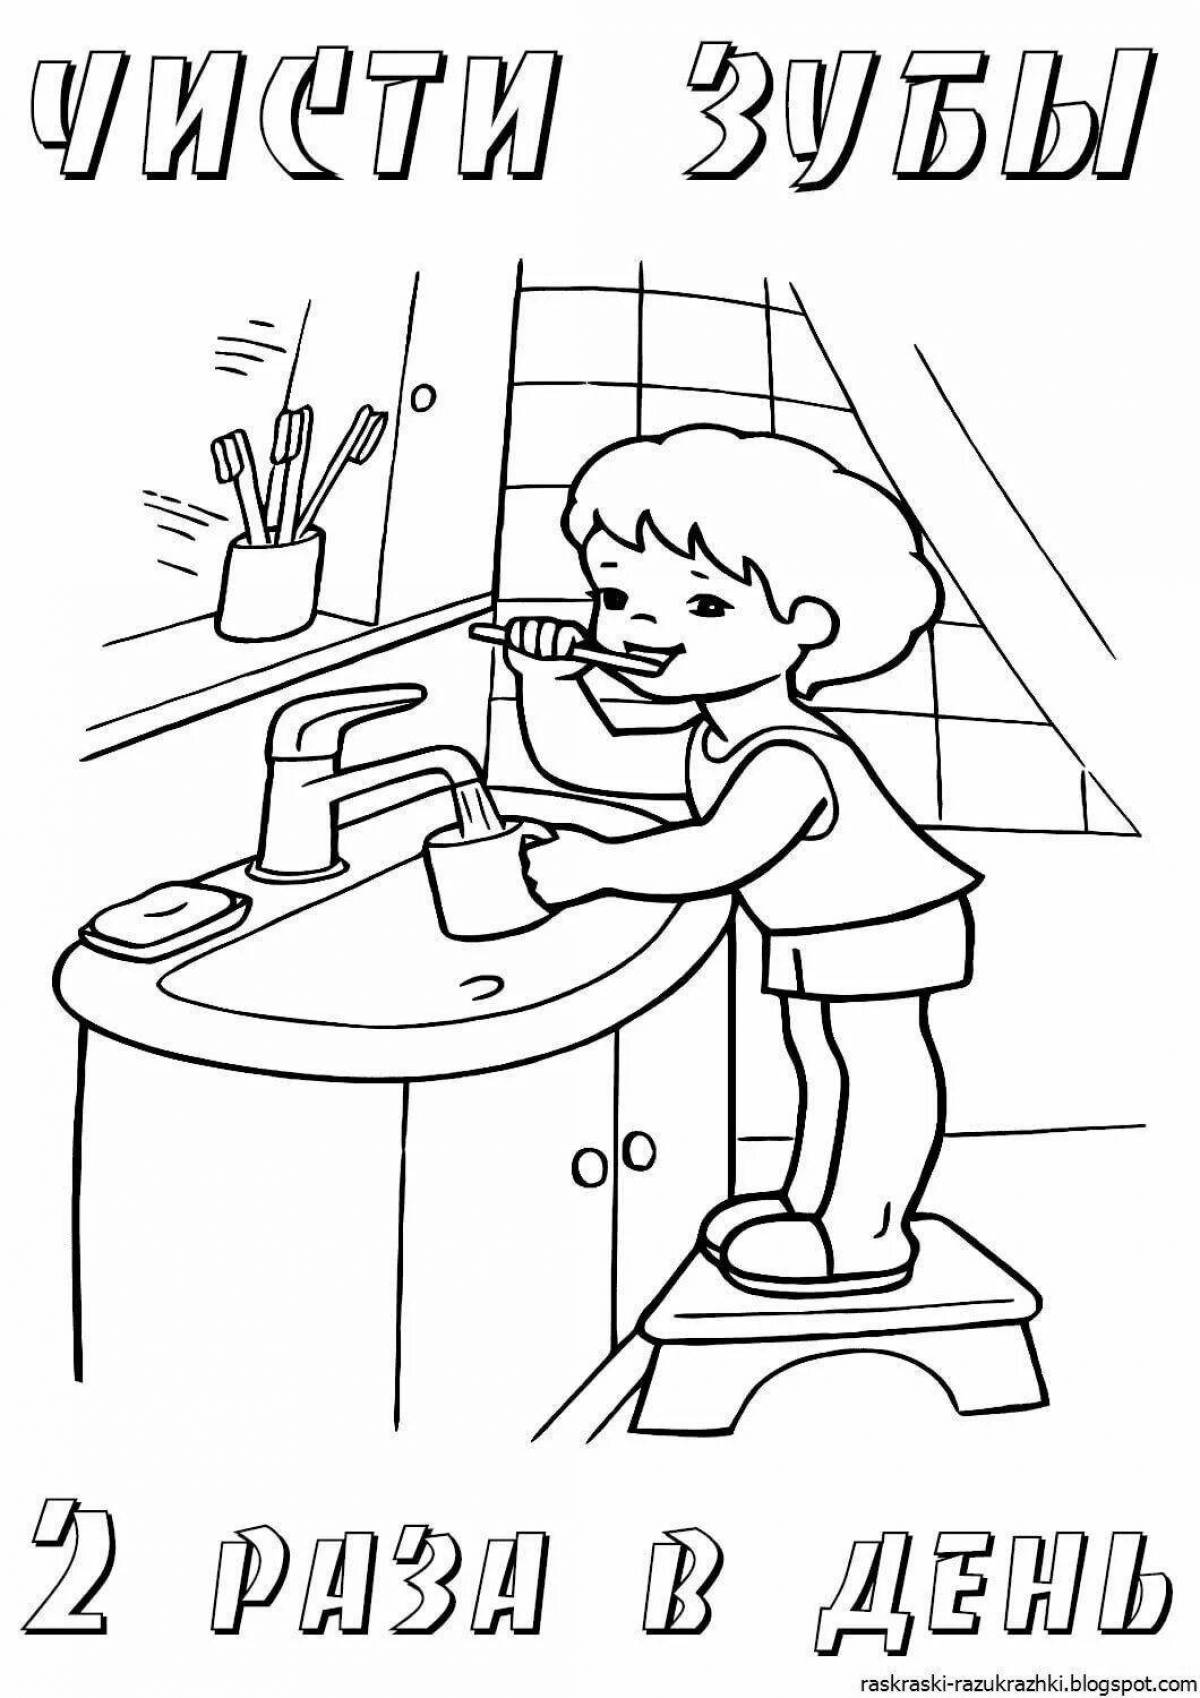 Relaxing health coloring page